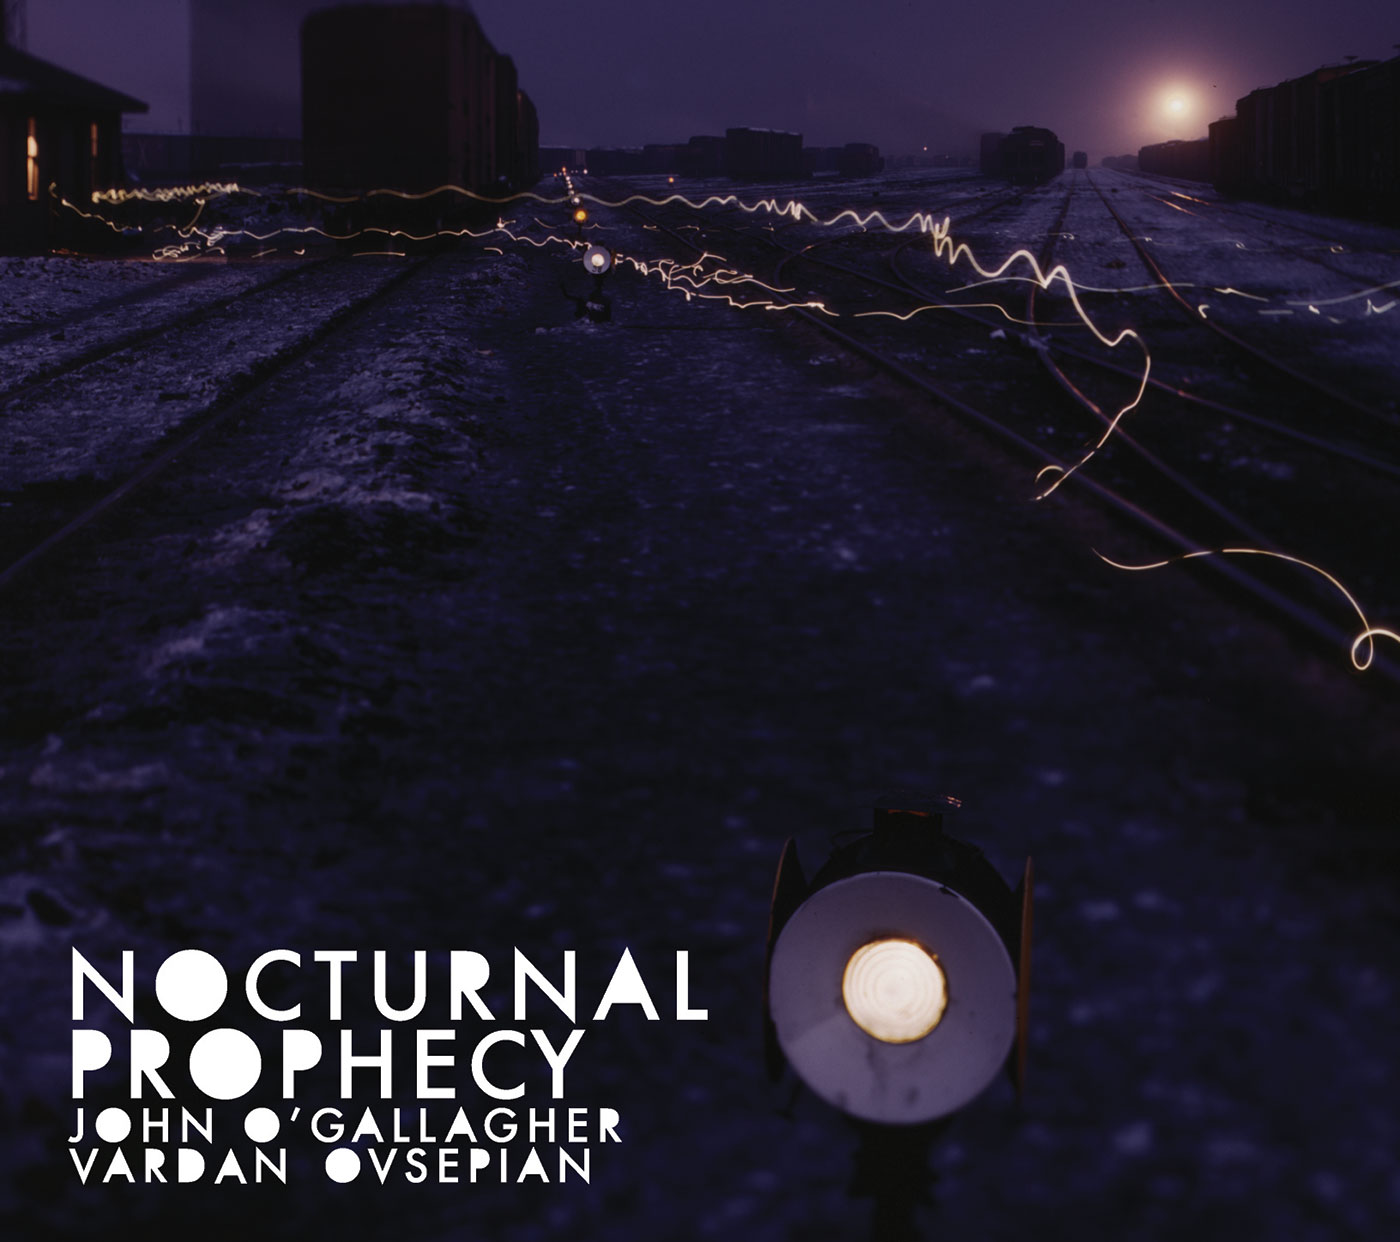 JOHN O'GALLAGHER - Nocturnal Prophecy cover 